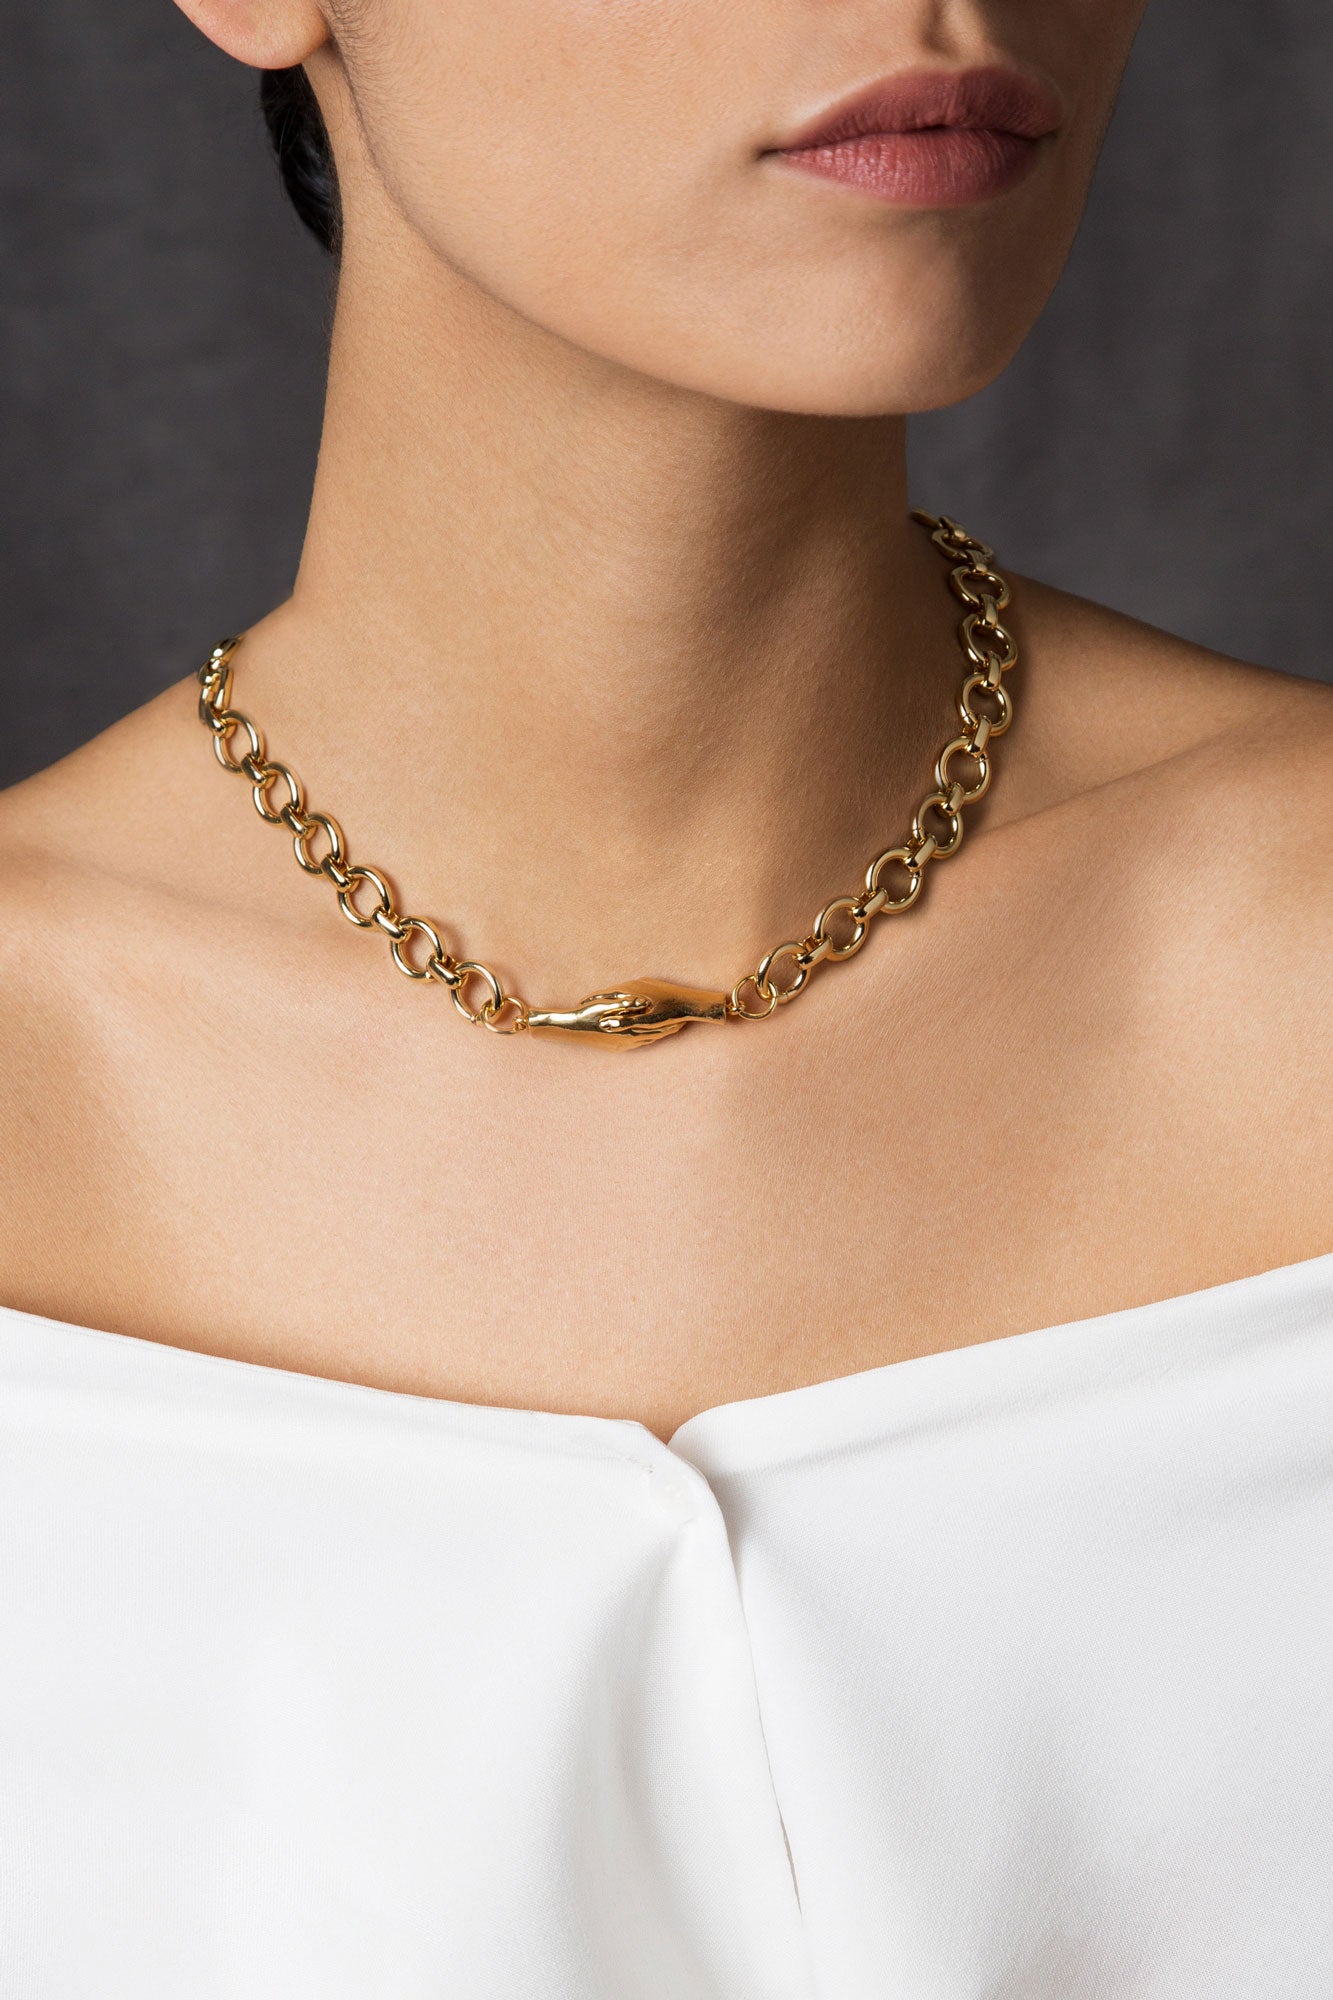 Gentlewoman's Agreement® Necklace in Gold